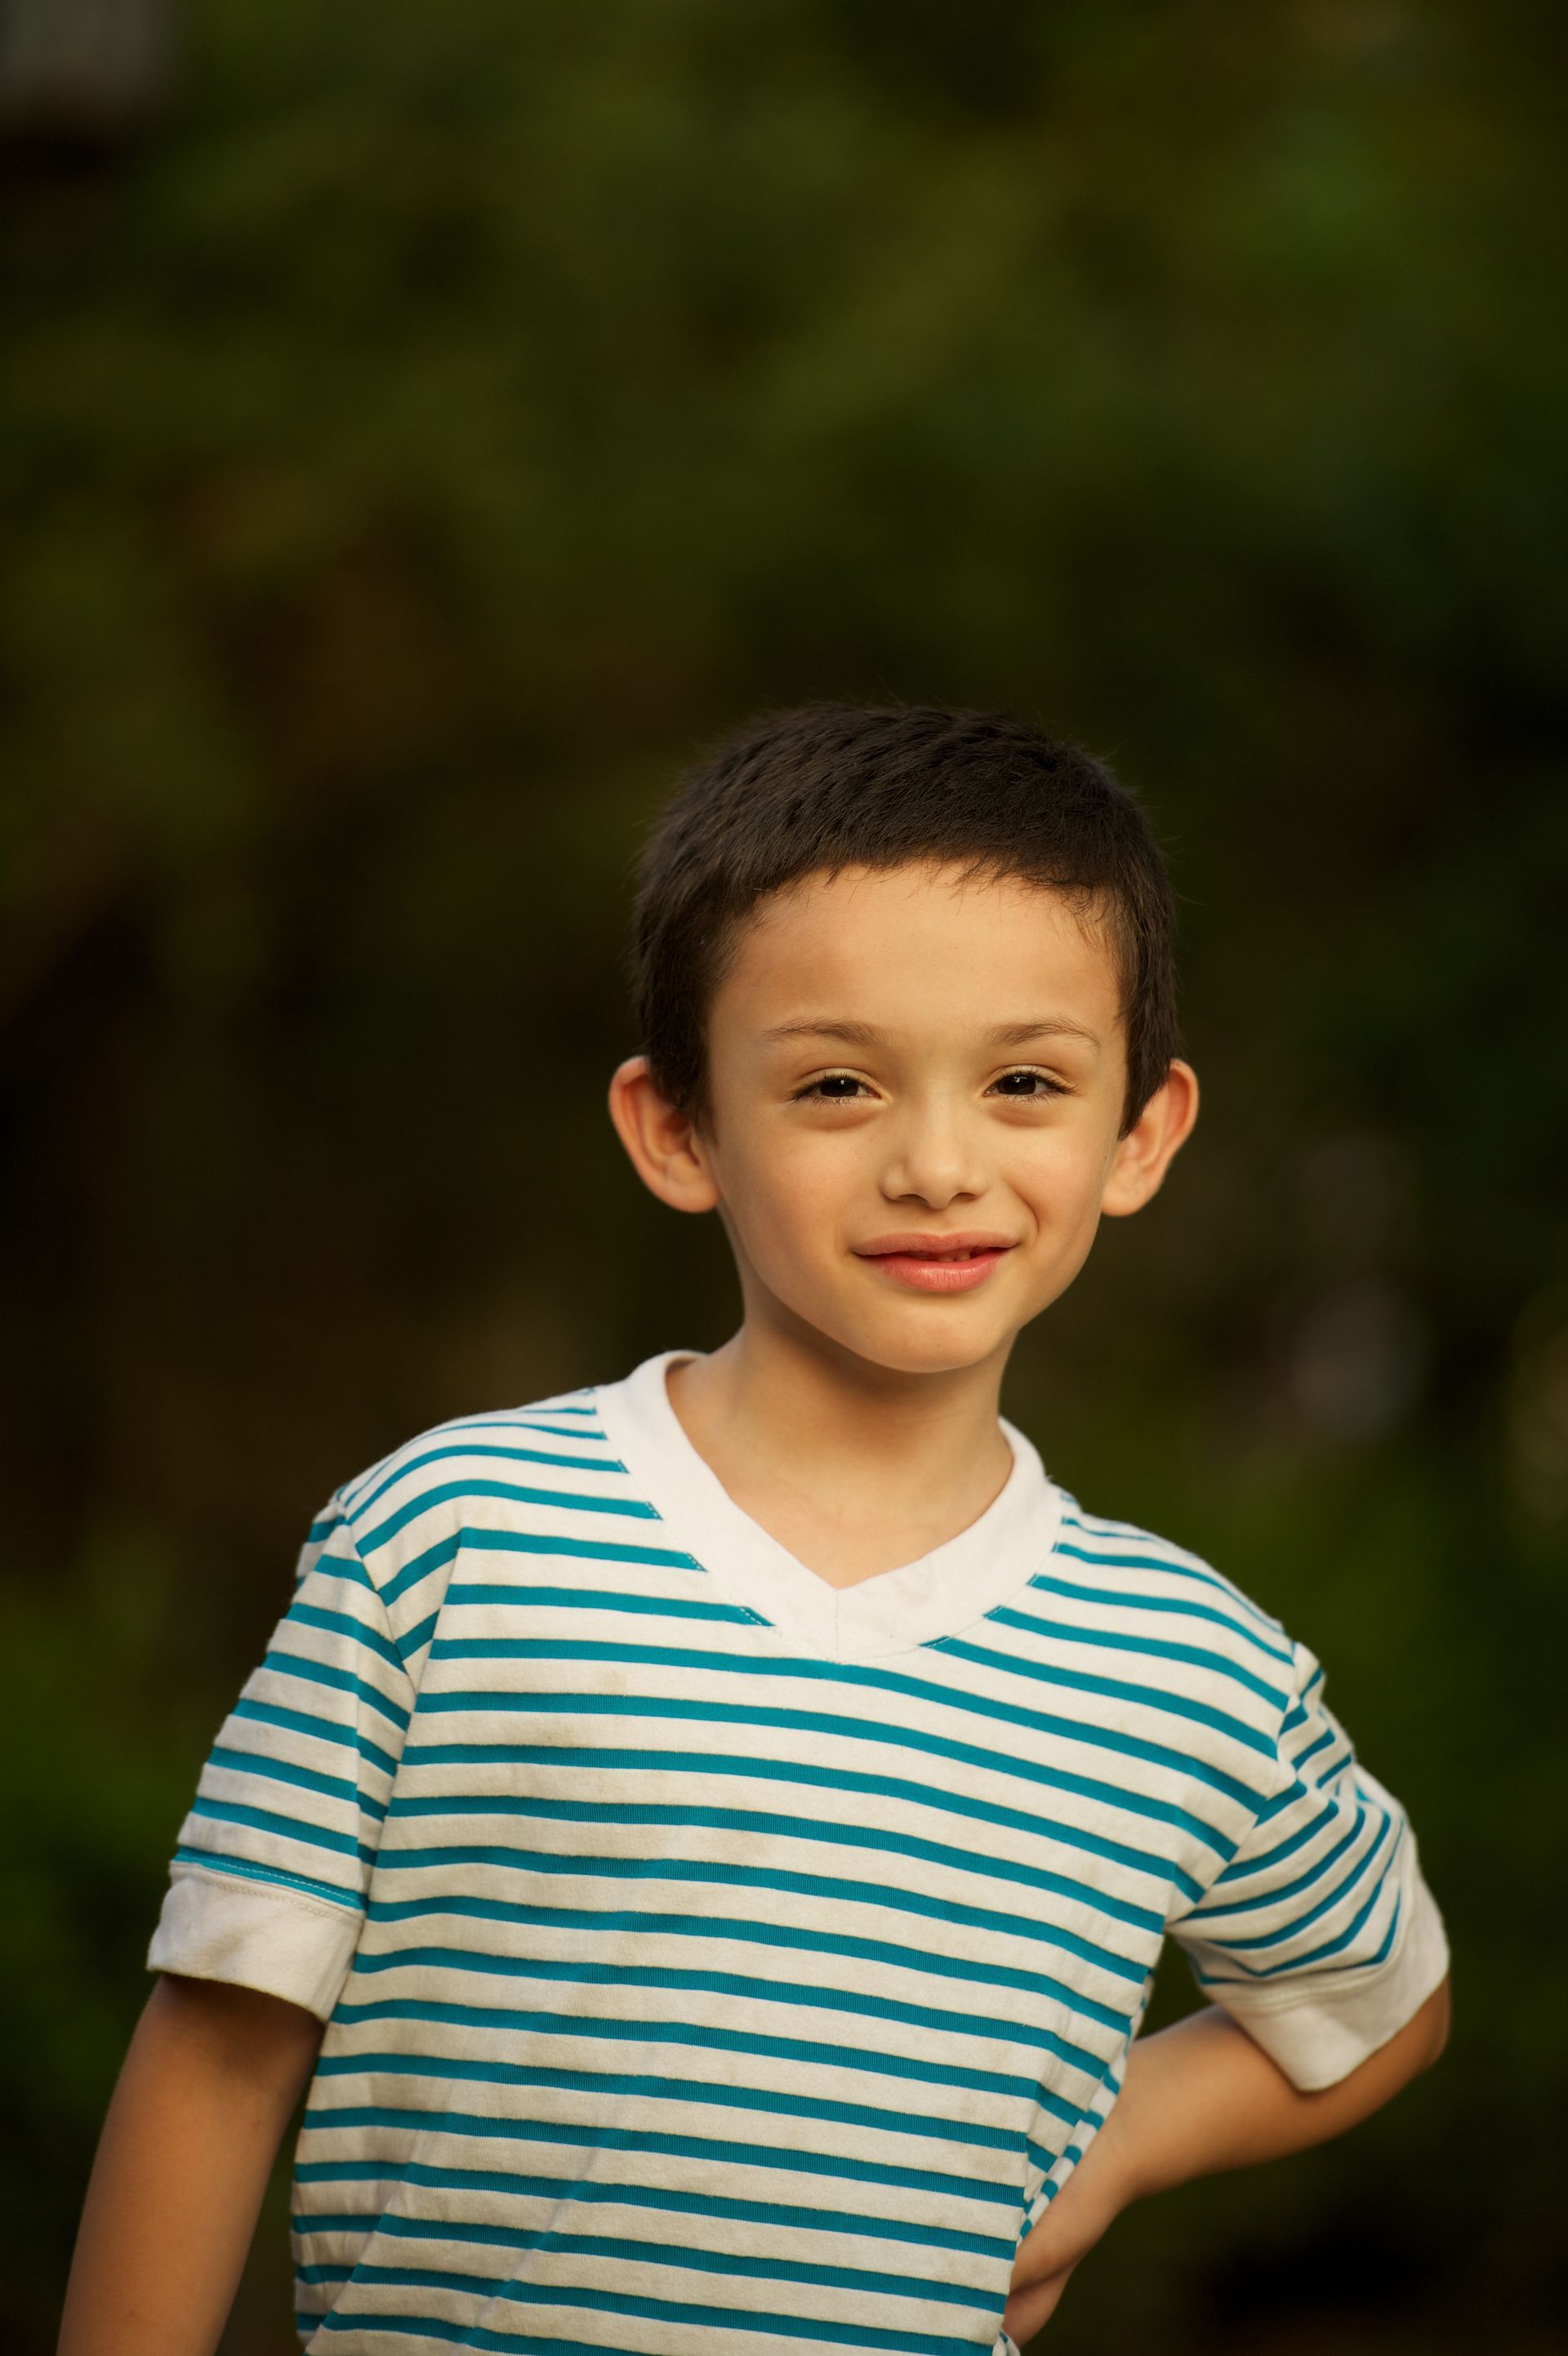 A portrait of a young boy in a striped shirt.